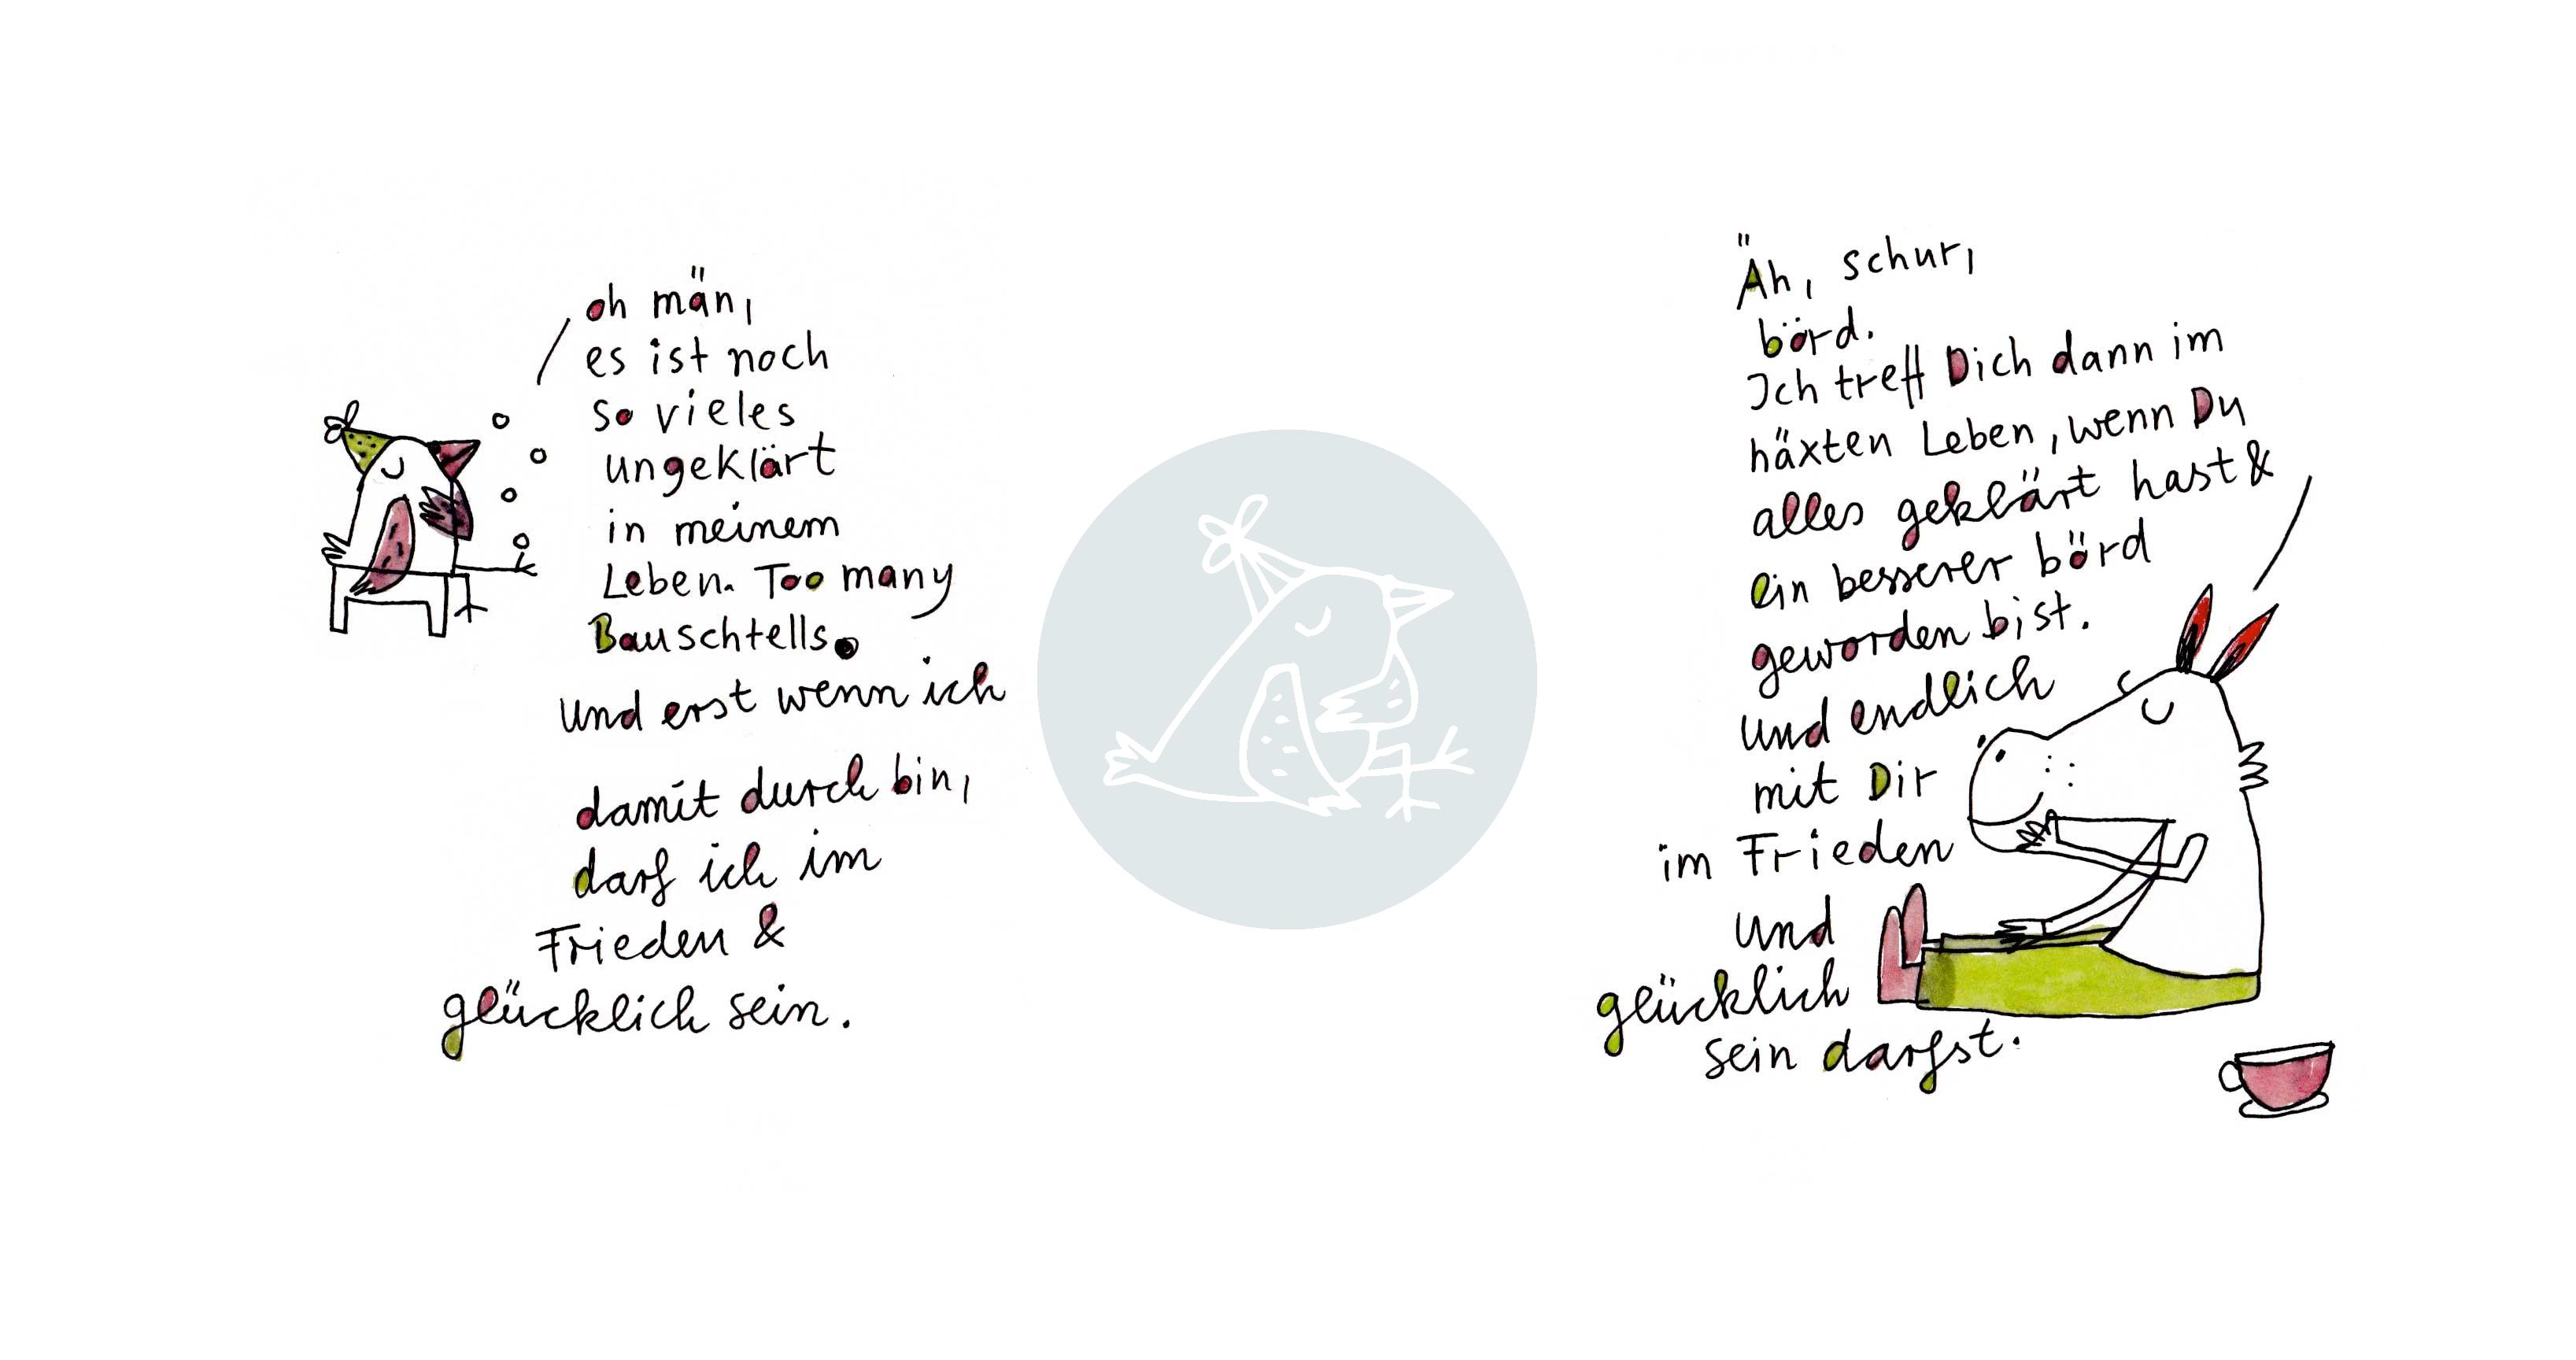 Buch - Speedcoaching with Dr. Pferd & the börd - karindrawings